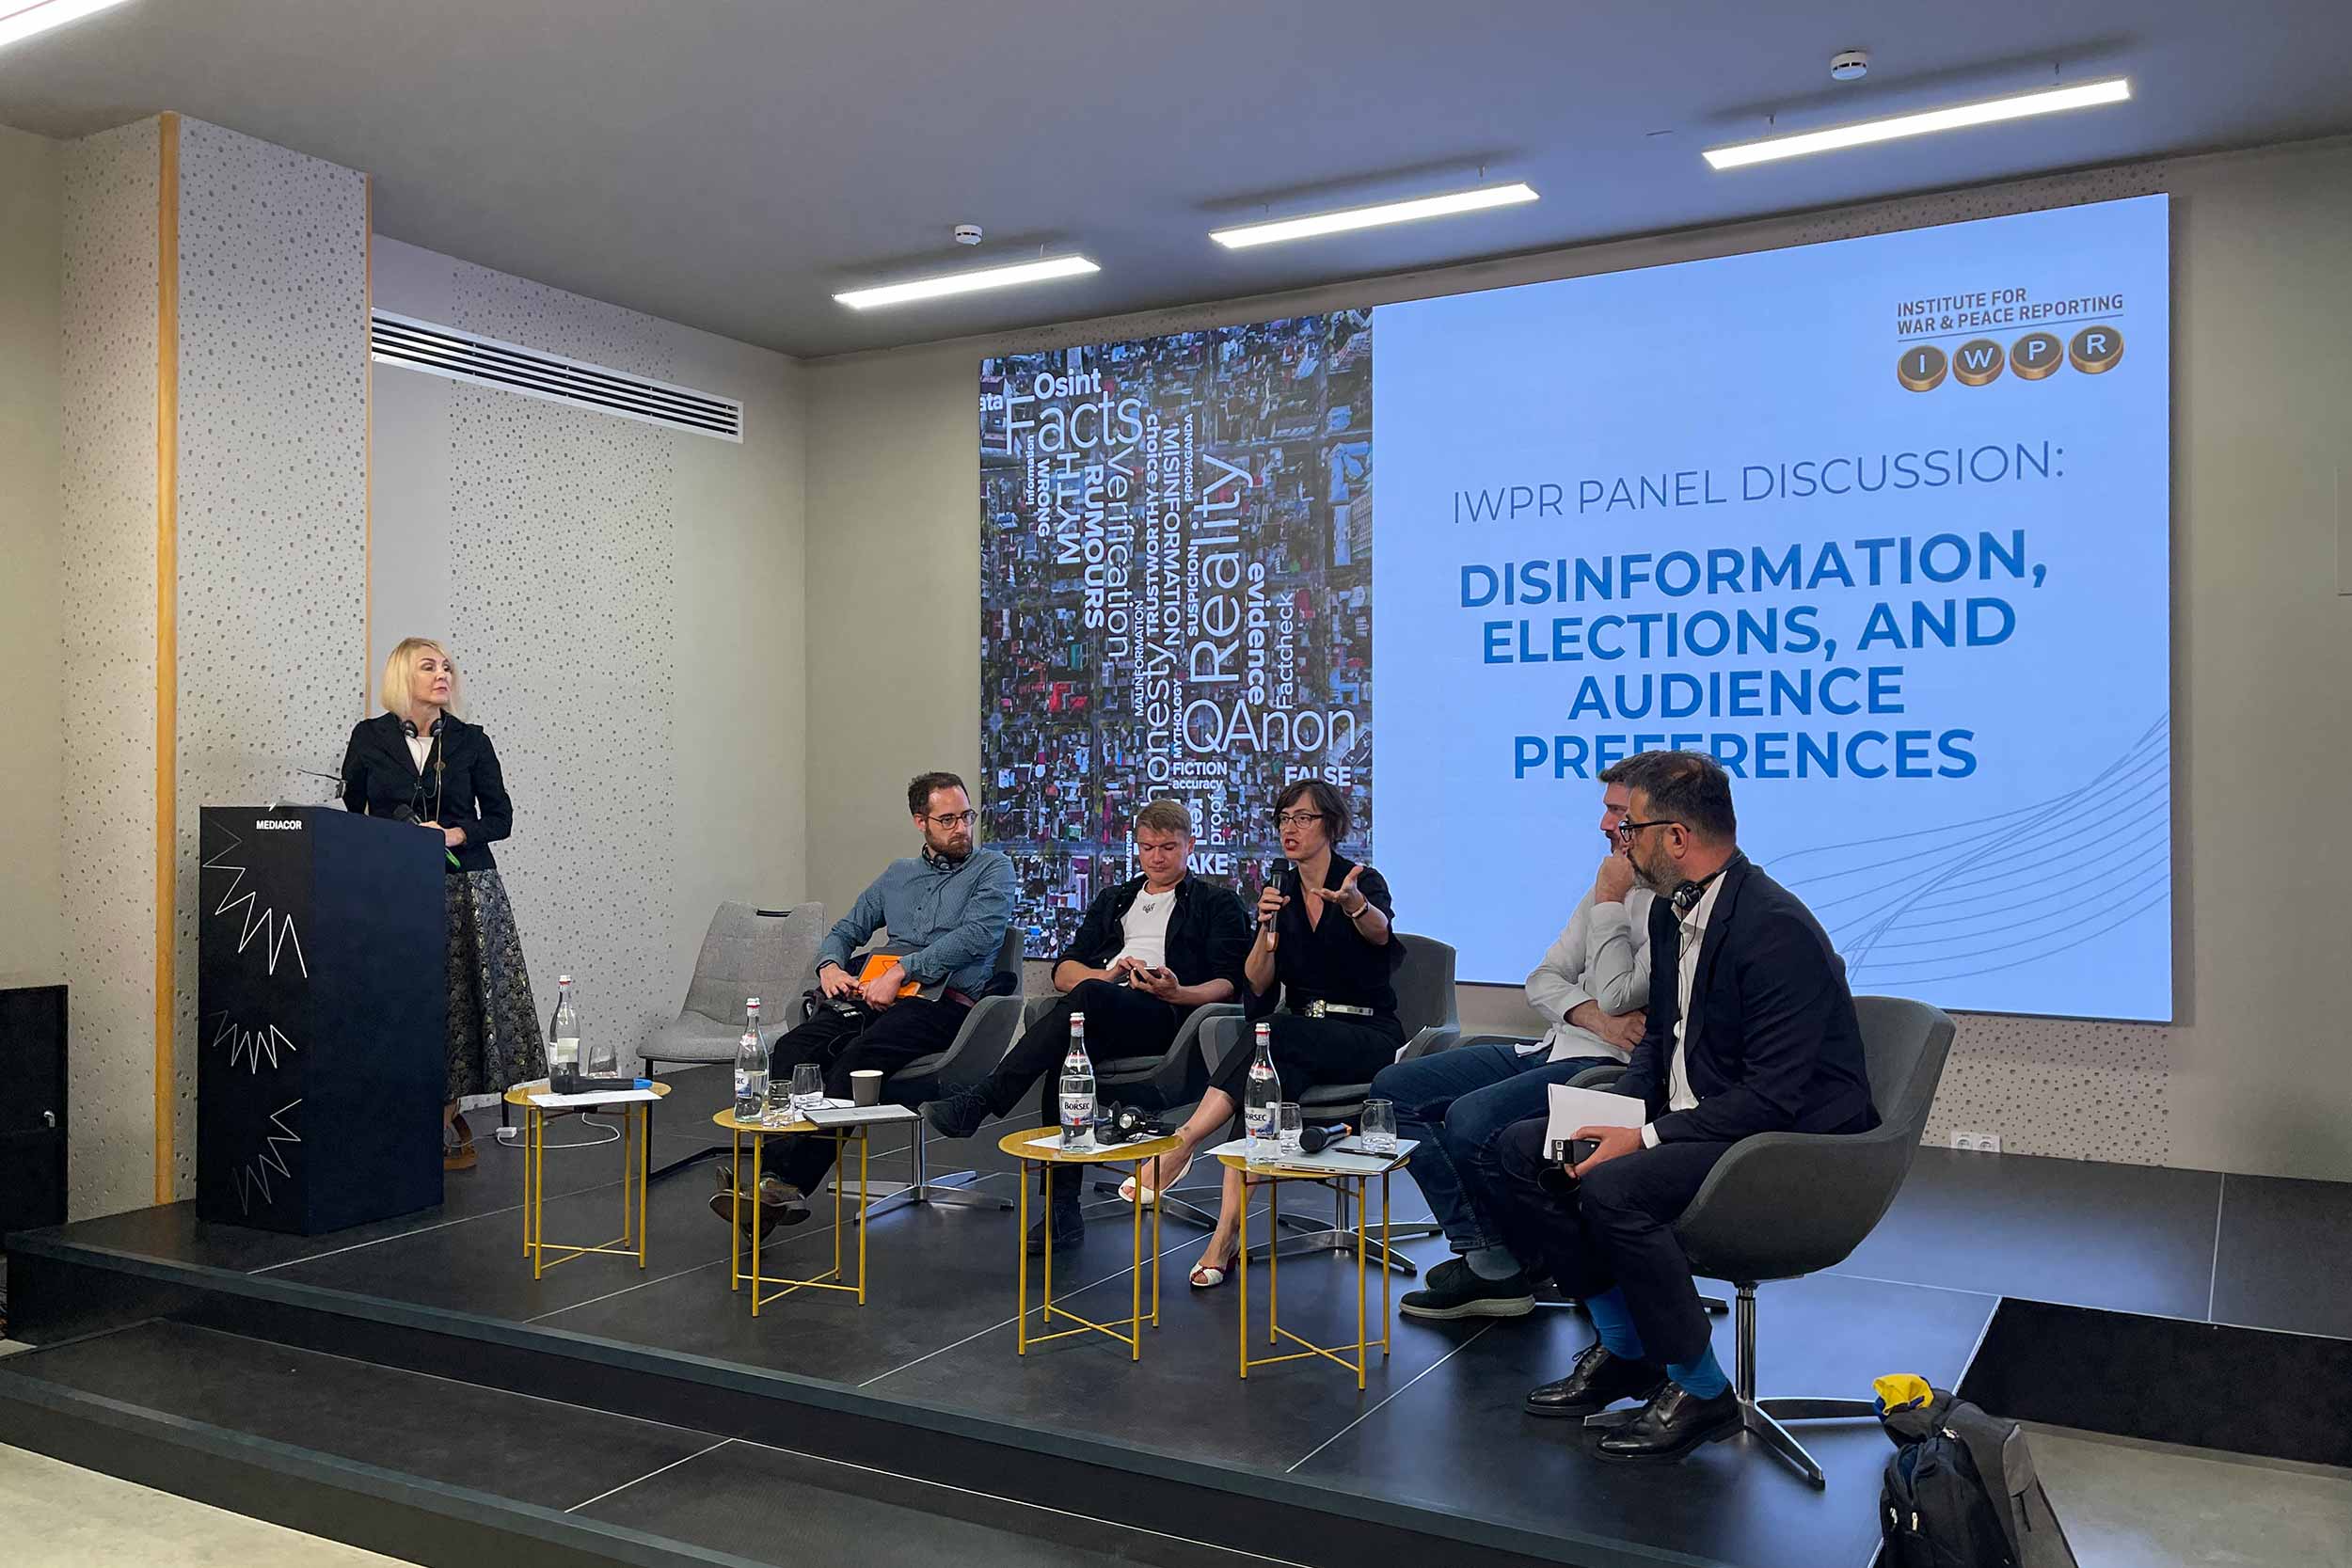 A panel discussion accompanied the launch of IWPR’s Independent Countering Disinformation Centre (ICDC) in Moldova’s capital Chisinau. The centre will provide a key resource for independent media and civil society to identify and tackle foreign interference and malign influence. © Mariana Aricova